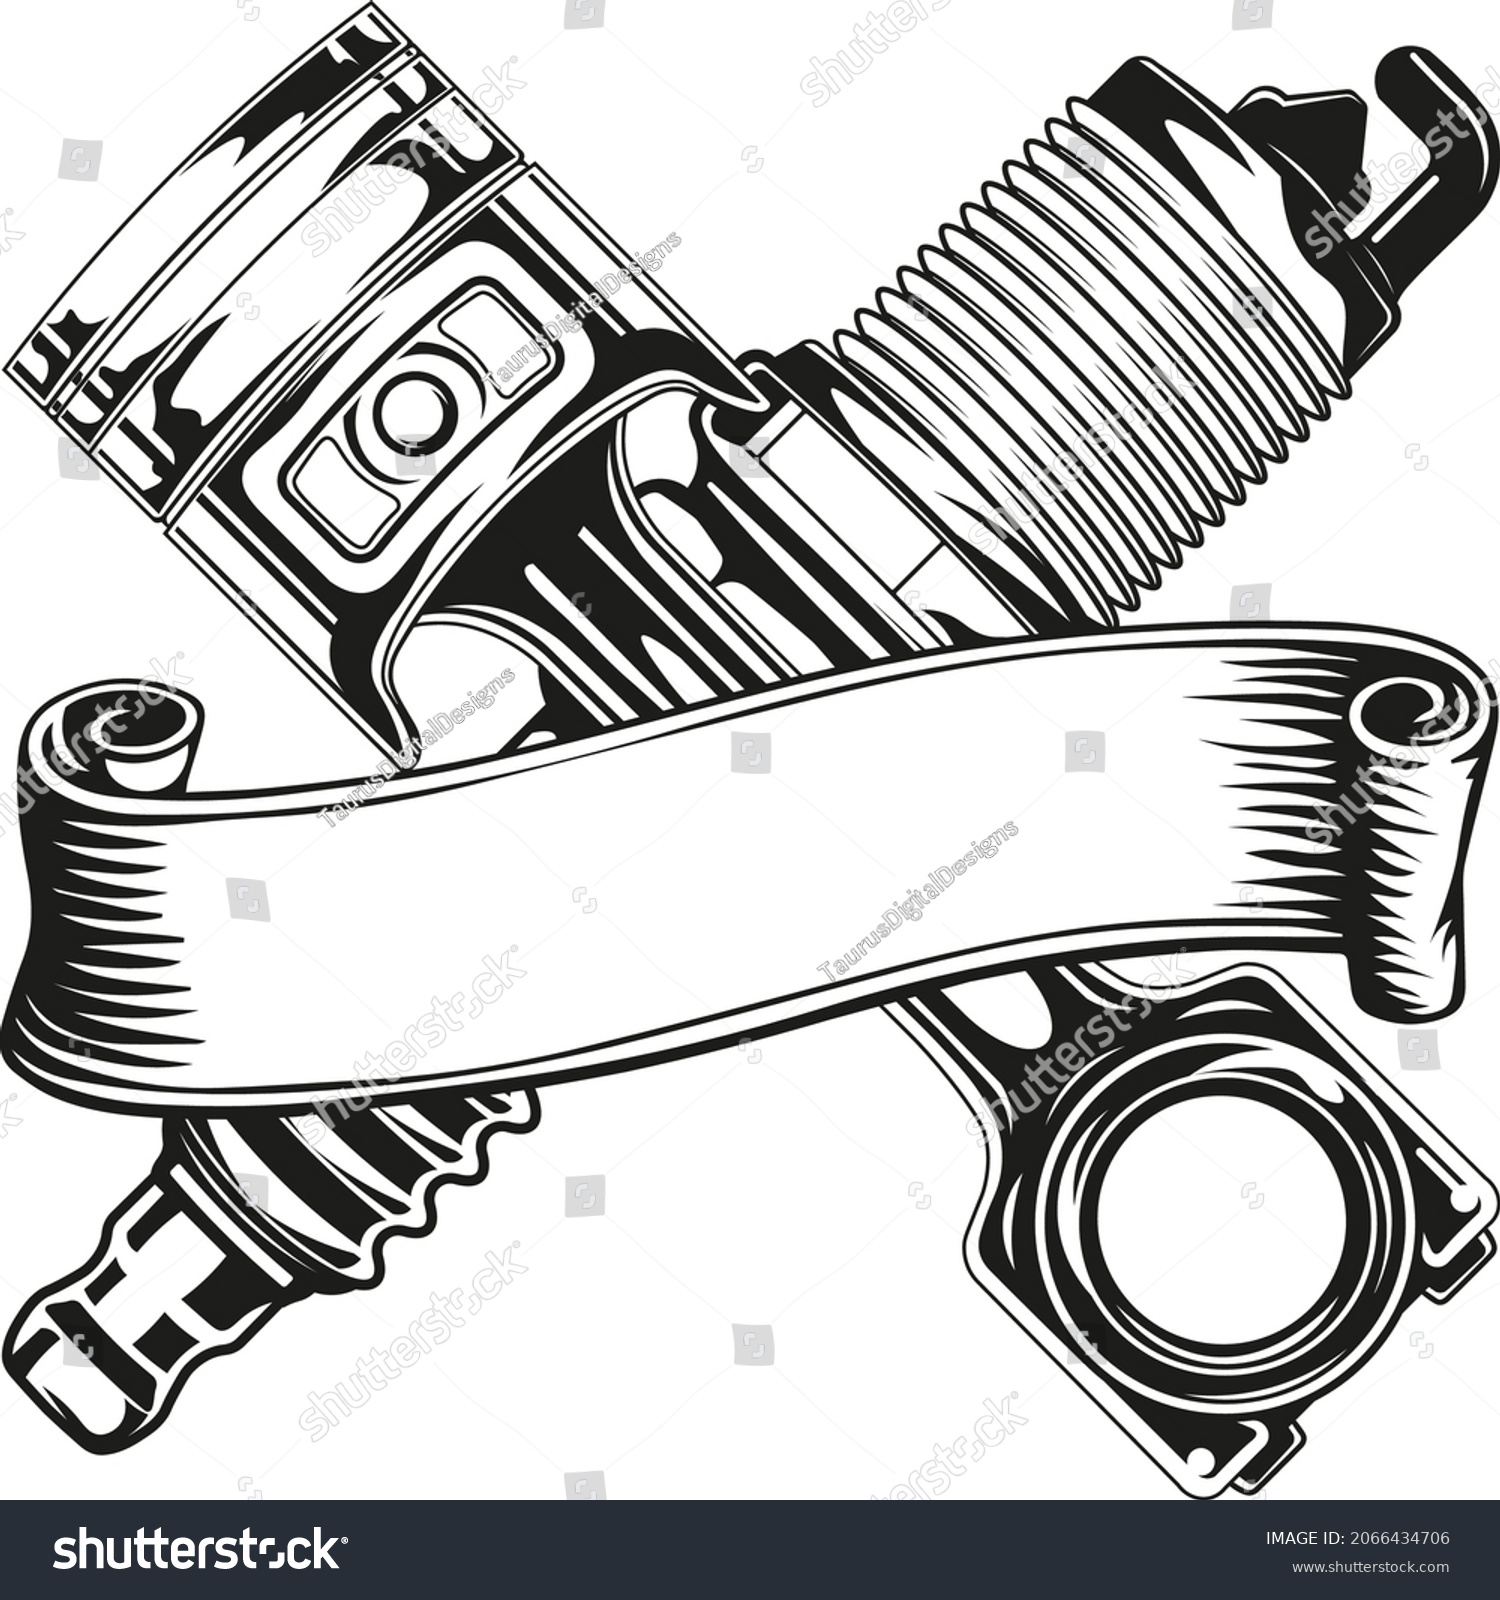 SVG of This Mechanic logo is part of the Mechanic, Garage, Repair service, and Mechanic tools collections. It consists of a piston SVG and a spark plug SVG. svg